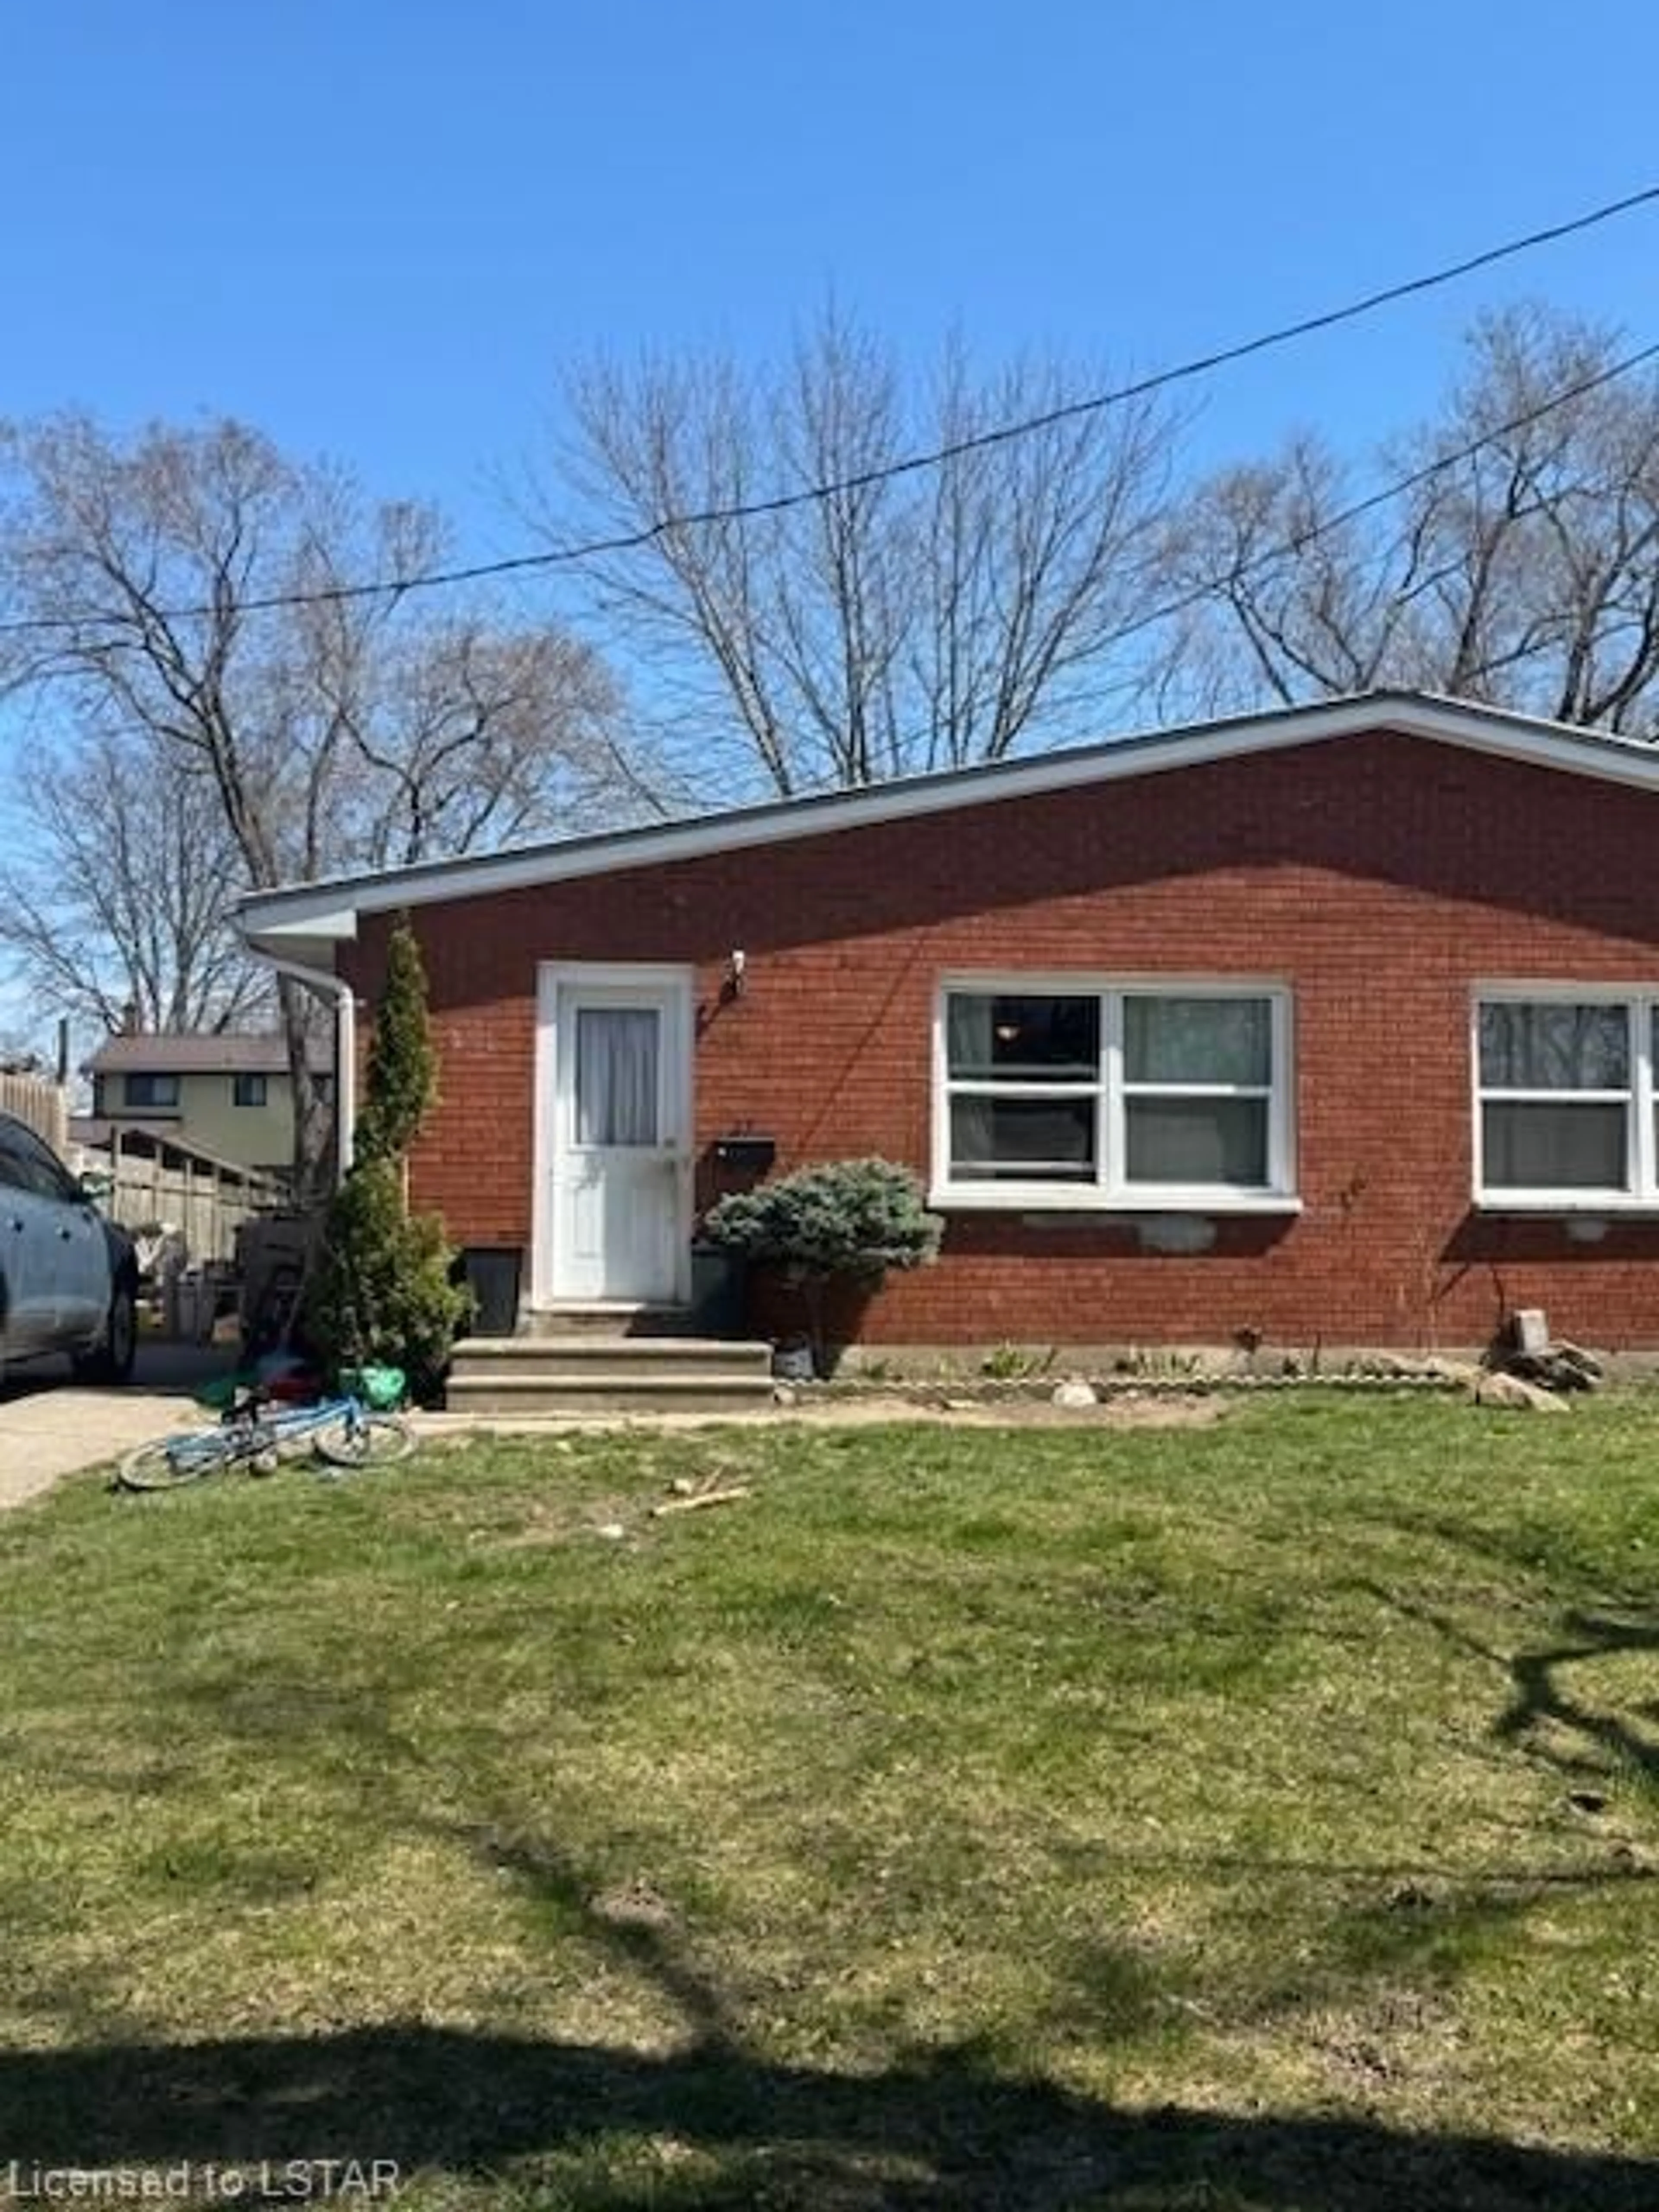 Home with brick exterior material for 27 Parkview Hts, Aylmer Ontario N4H 2J9